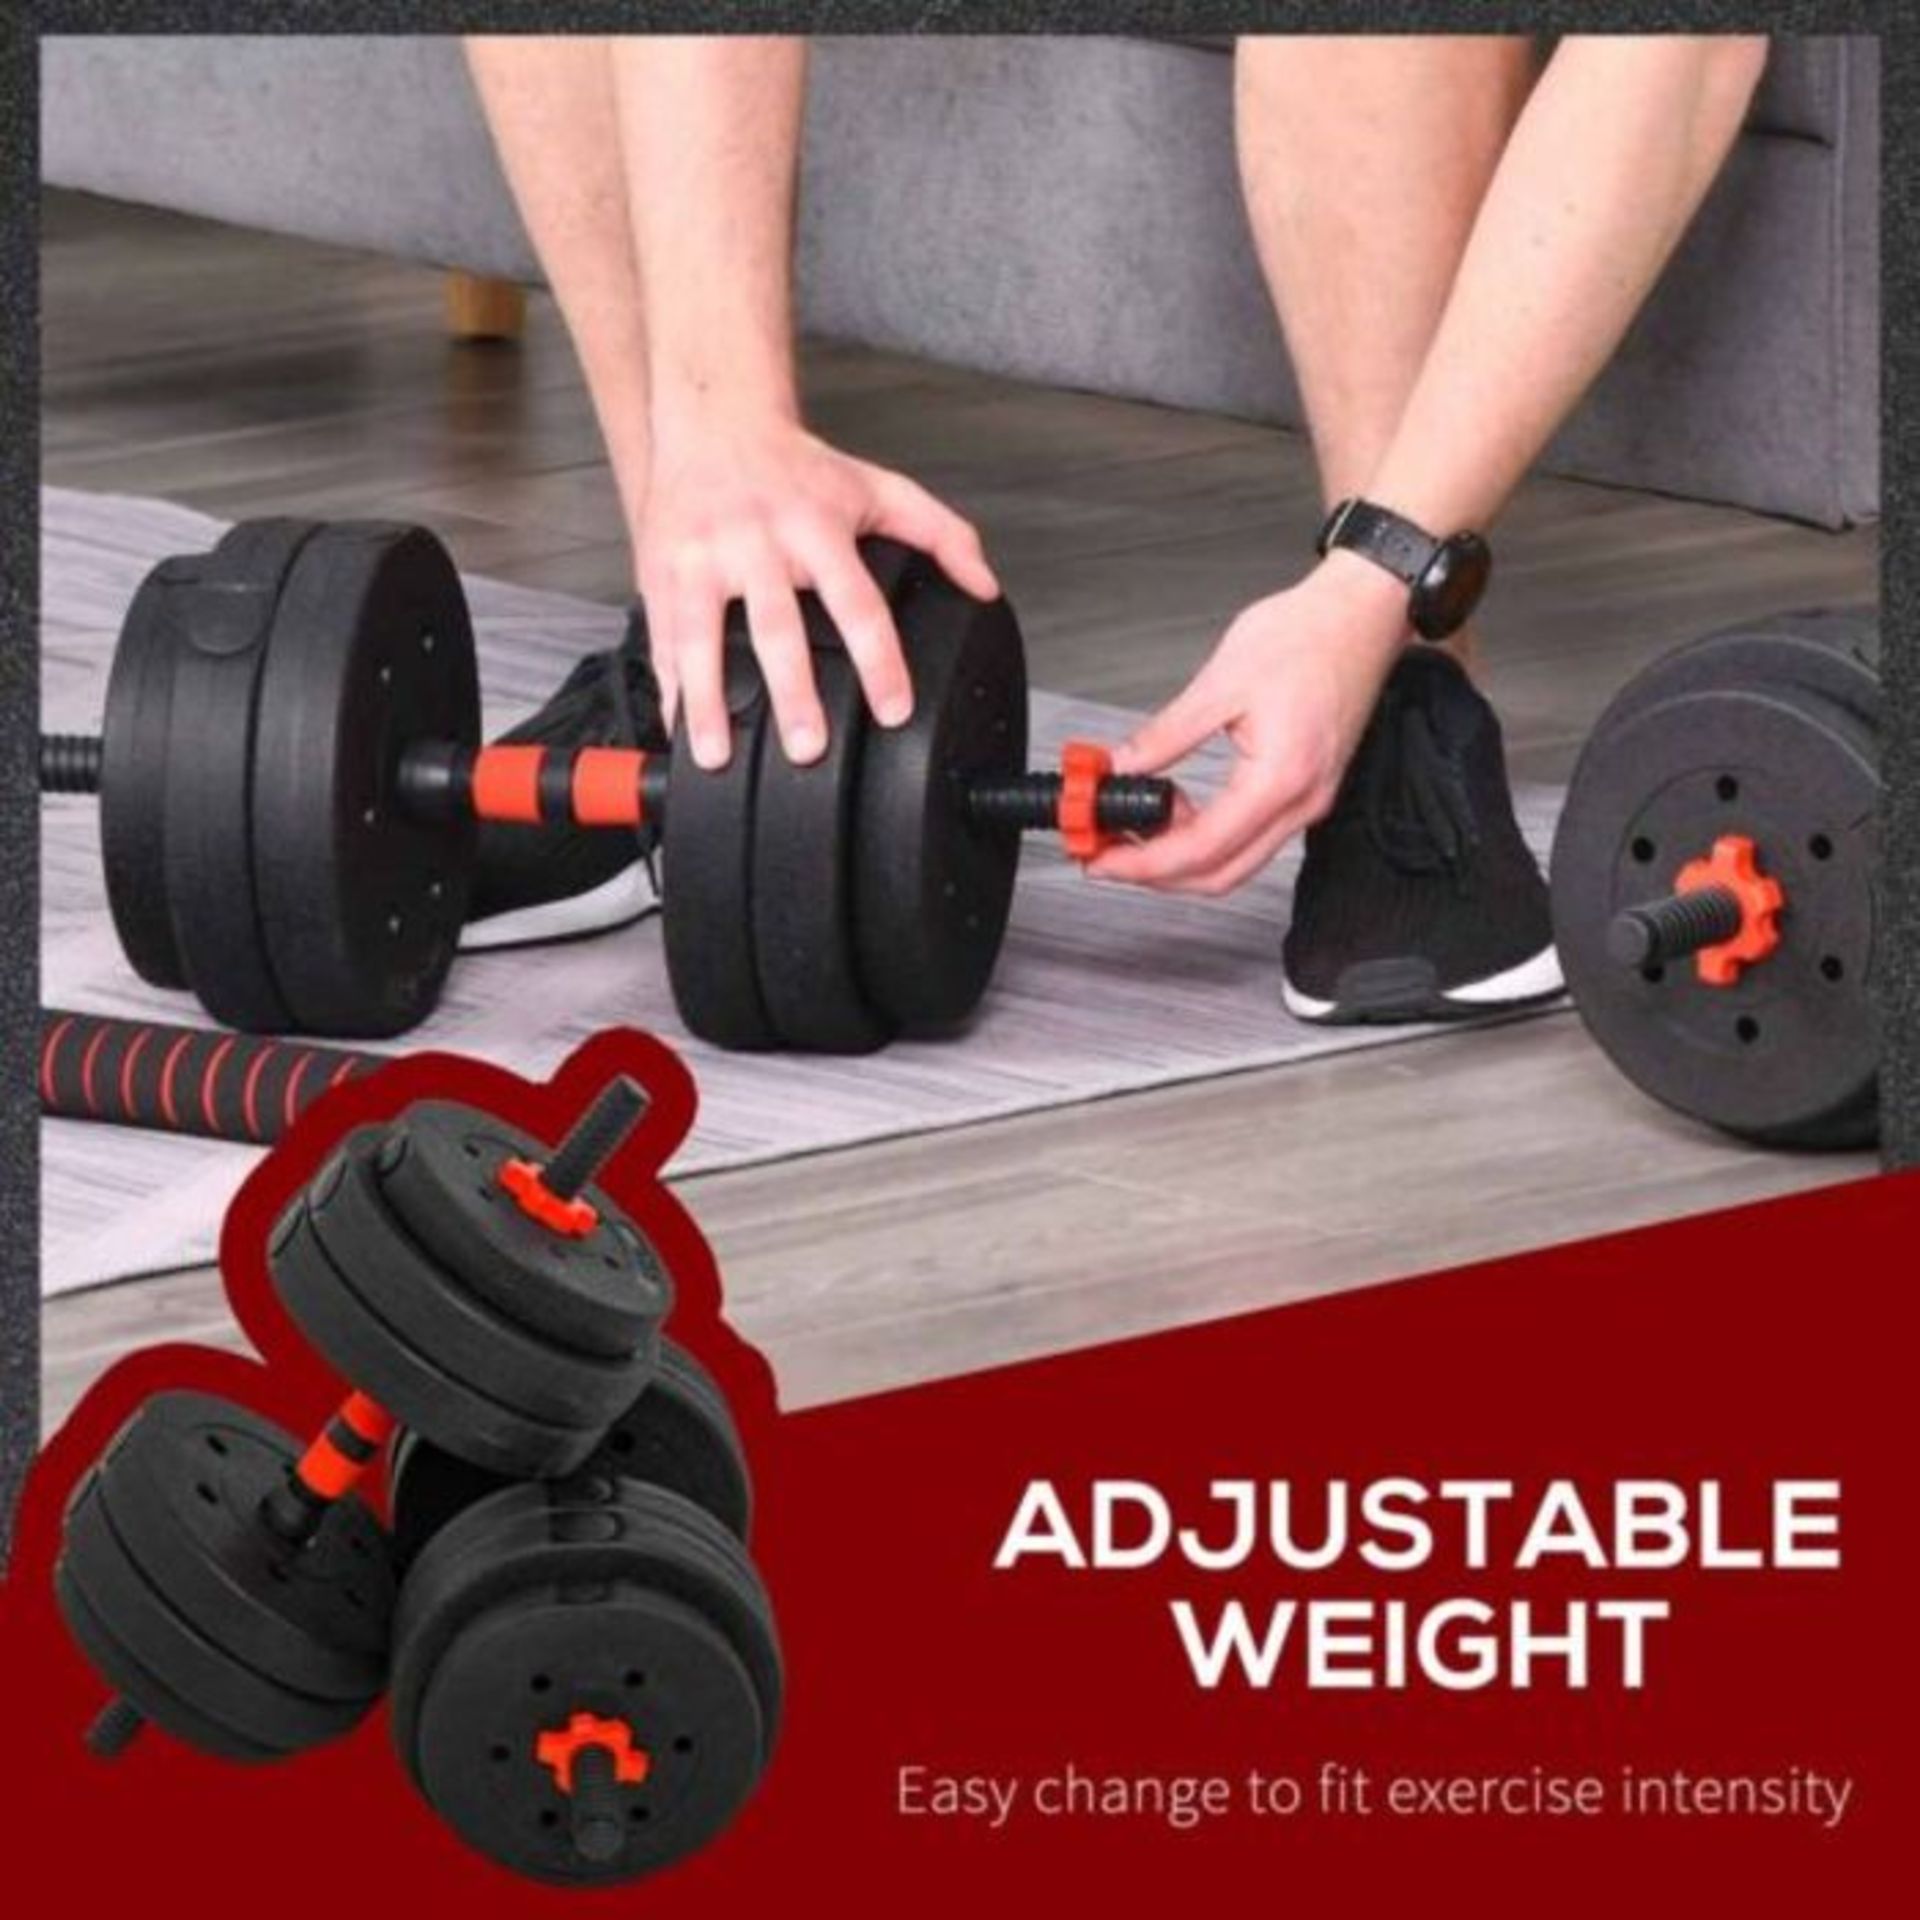 Hom Com 2 in1 Barbell/Dumb bell 30kg weight set, new and boxed, Similar sets retail at around œ50 - Image 3 of 4